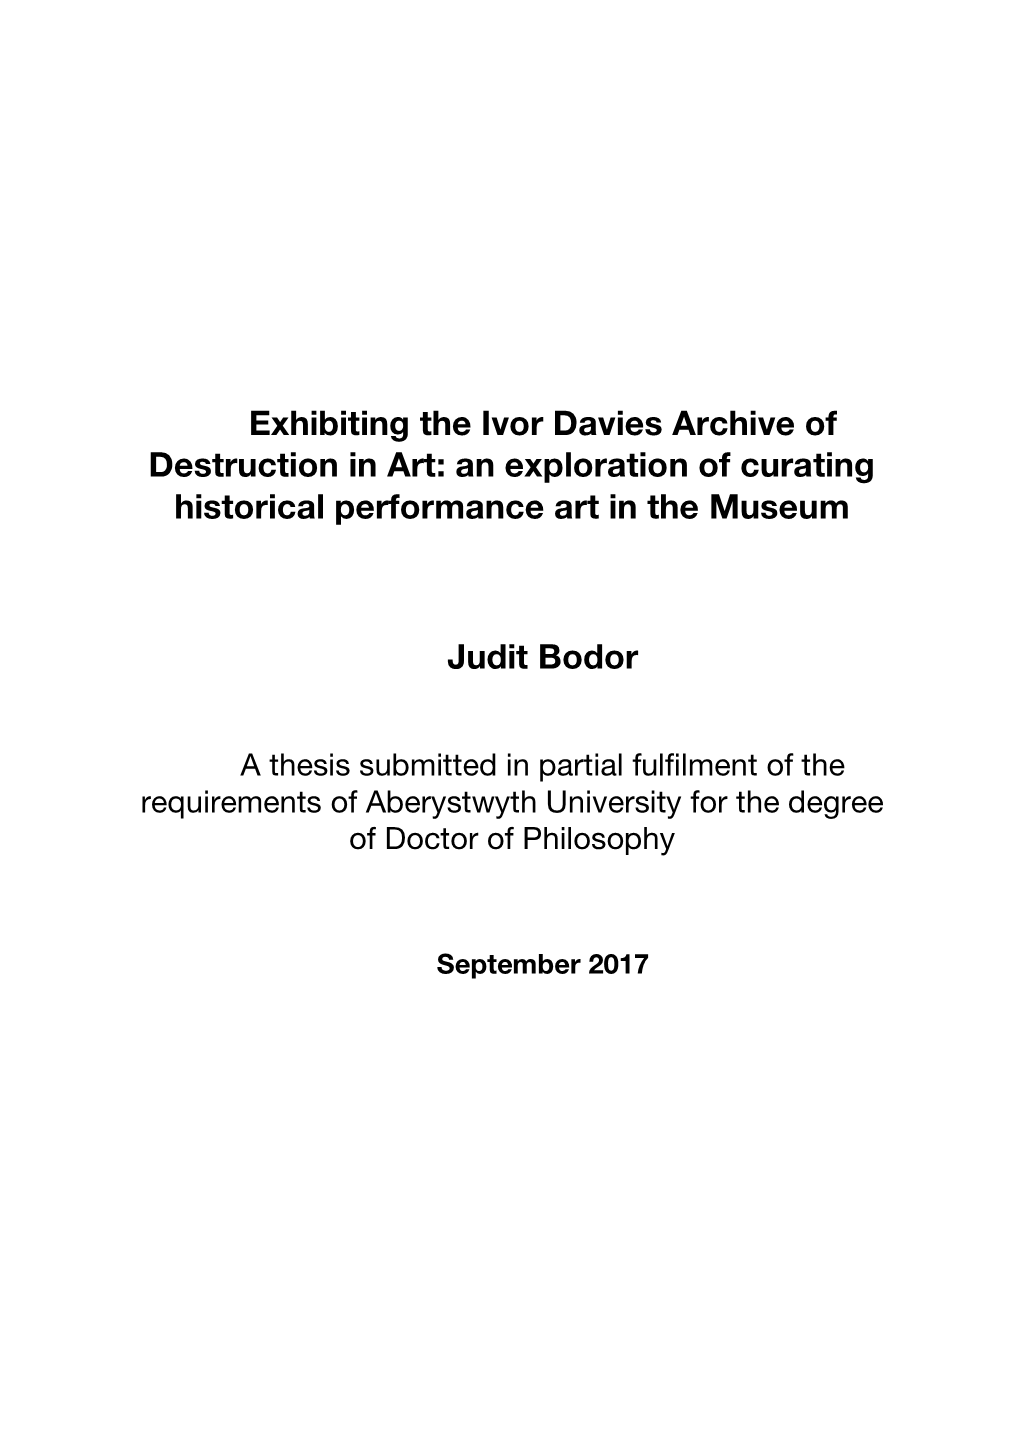 Exhibiting the Ivor Davies Archive of Destruction in Art: an Exploration of Curating Historical Performance Art in the Museum Ju